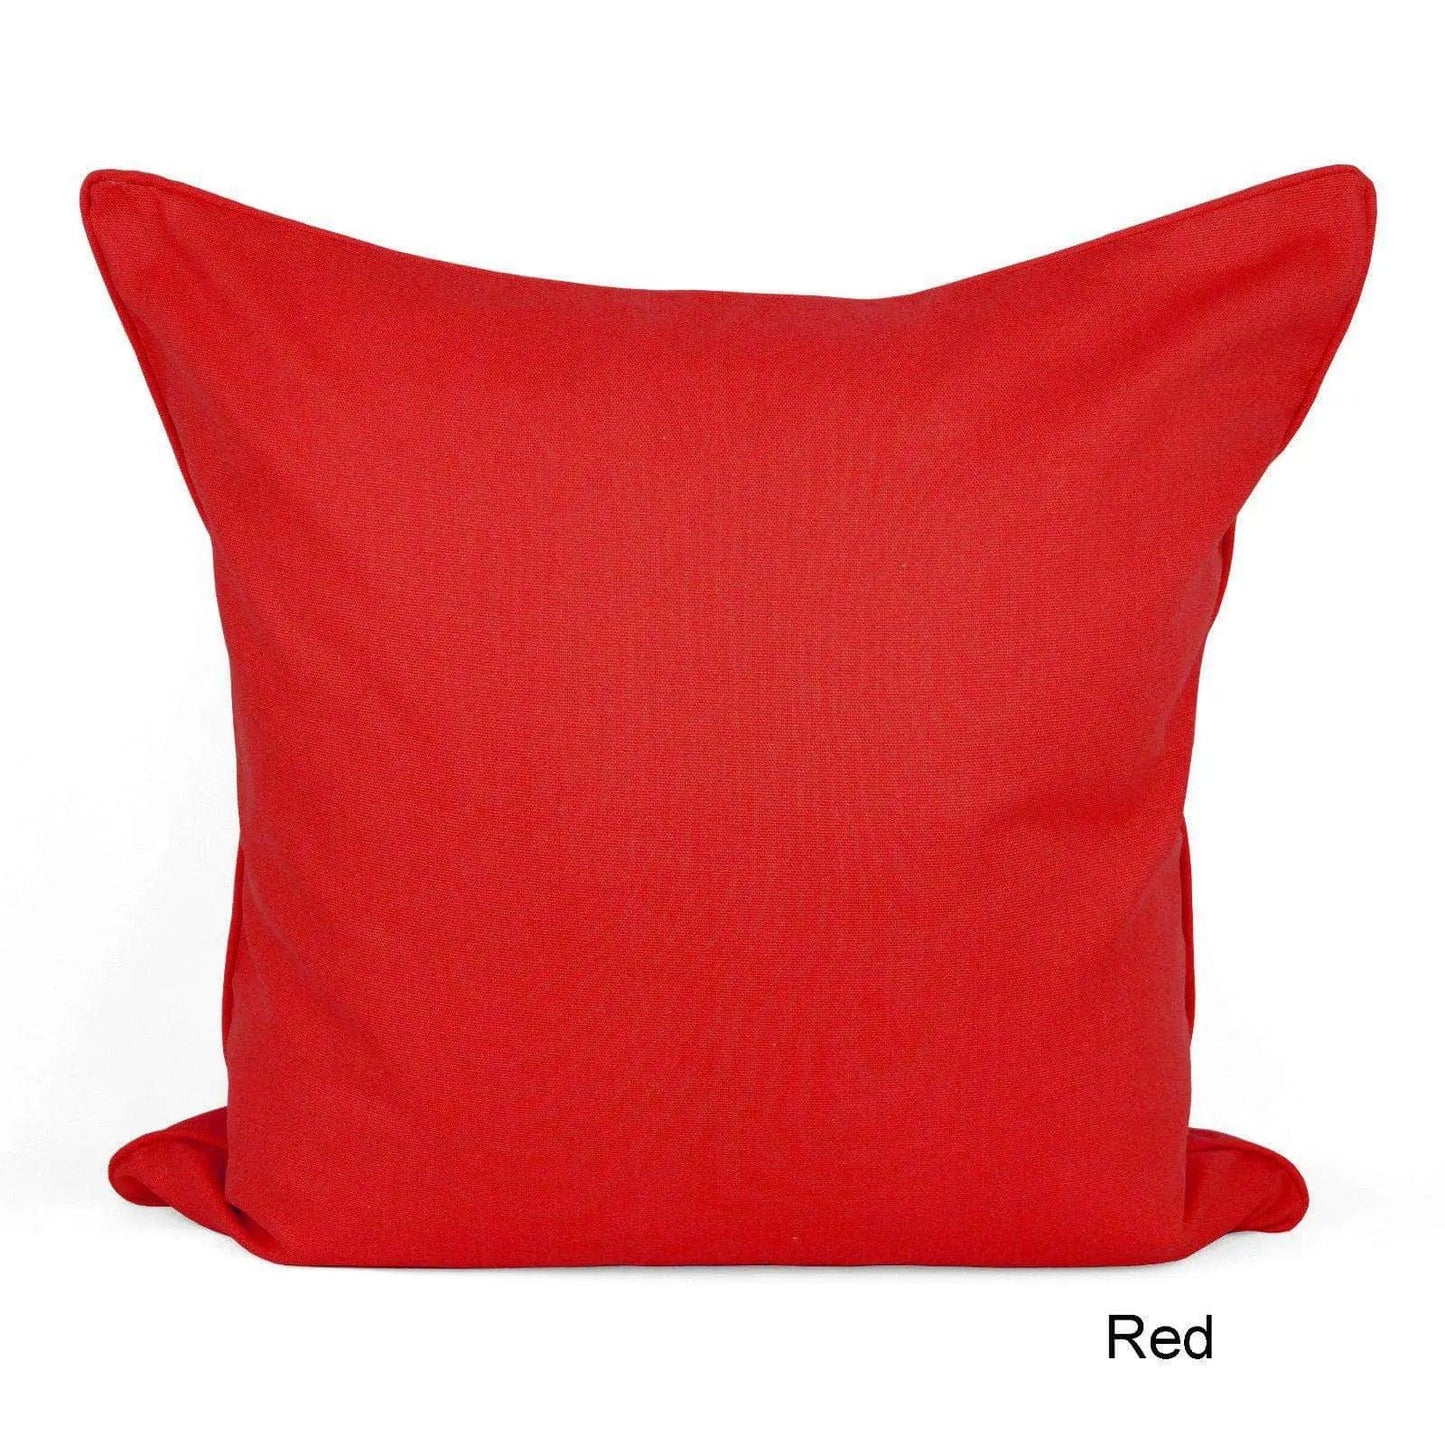 a red pillow on a white background